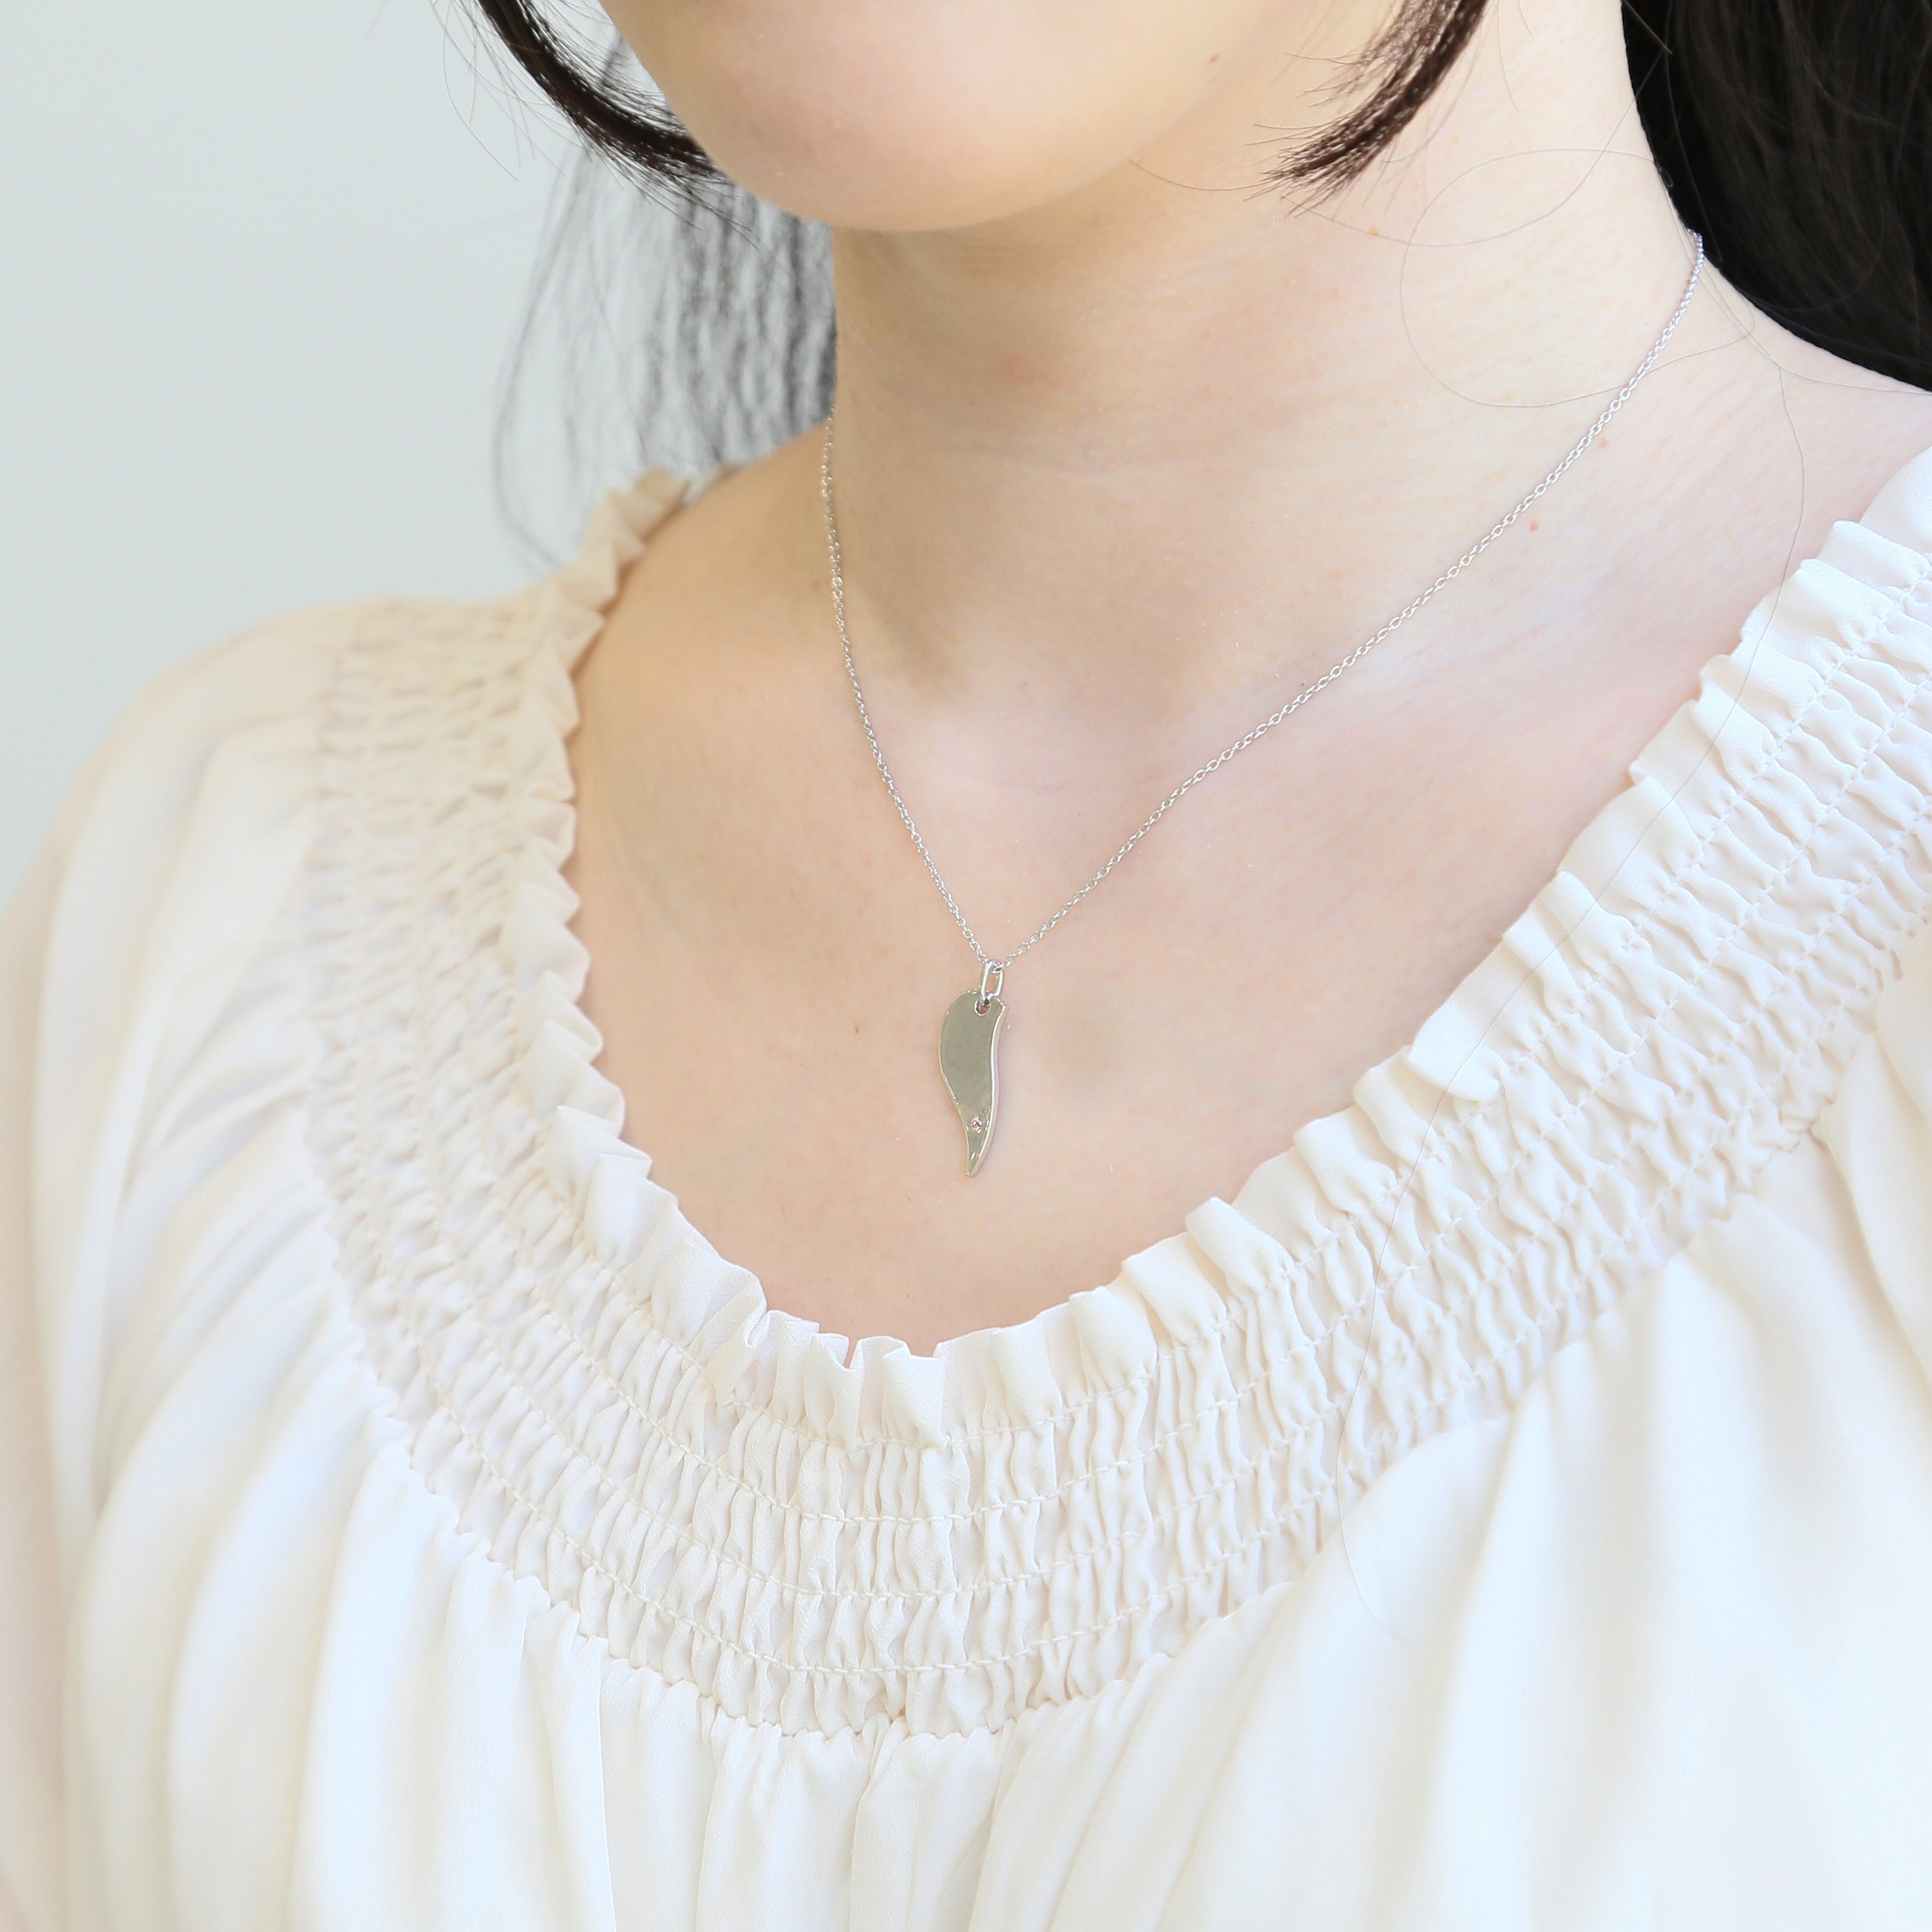 Pair necklace | 95-2212-2213